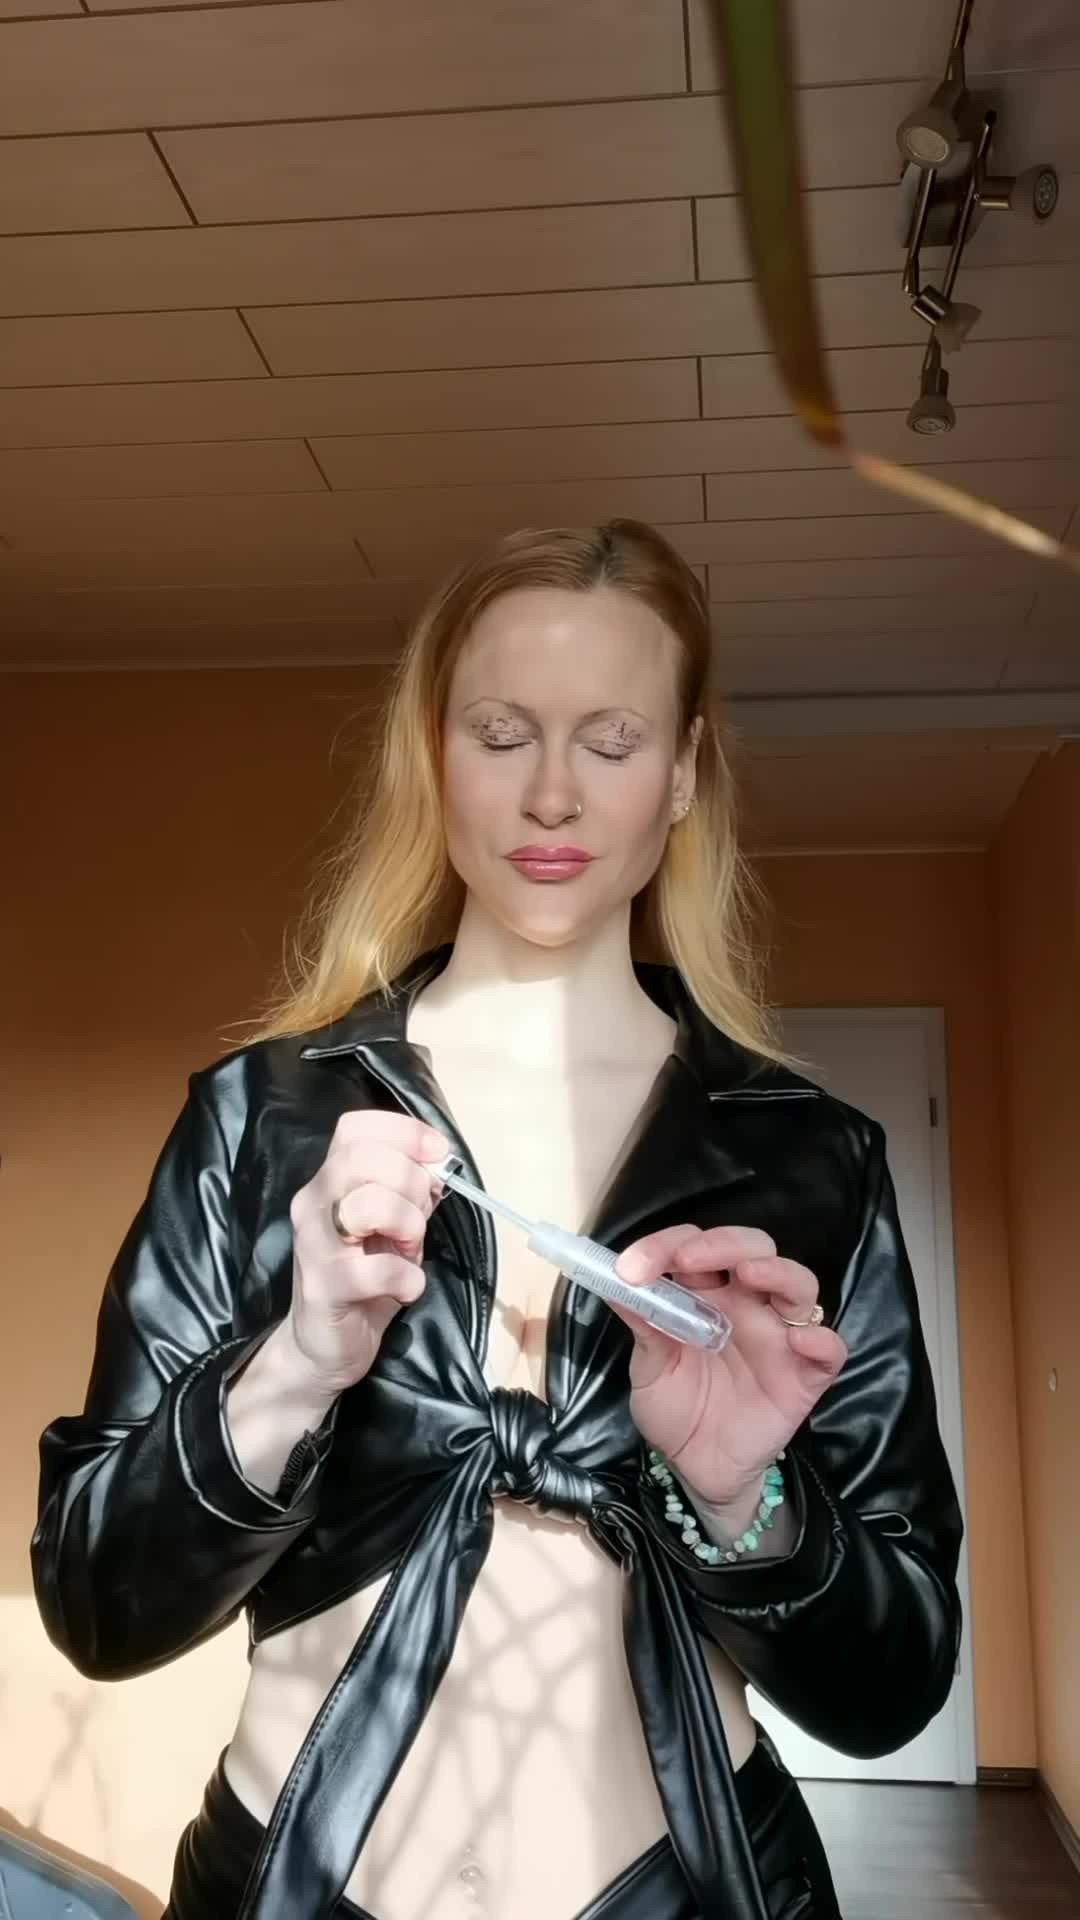 Video post by BlondeHexe